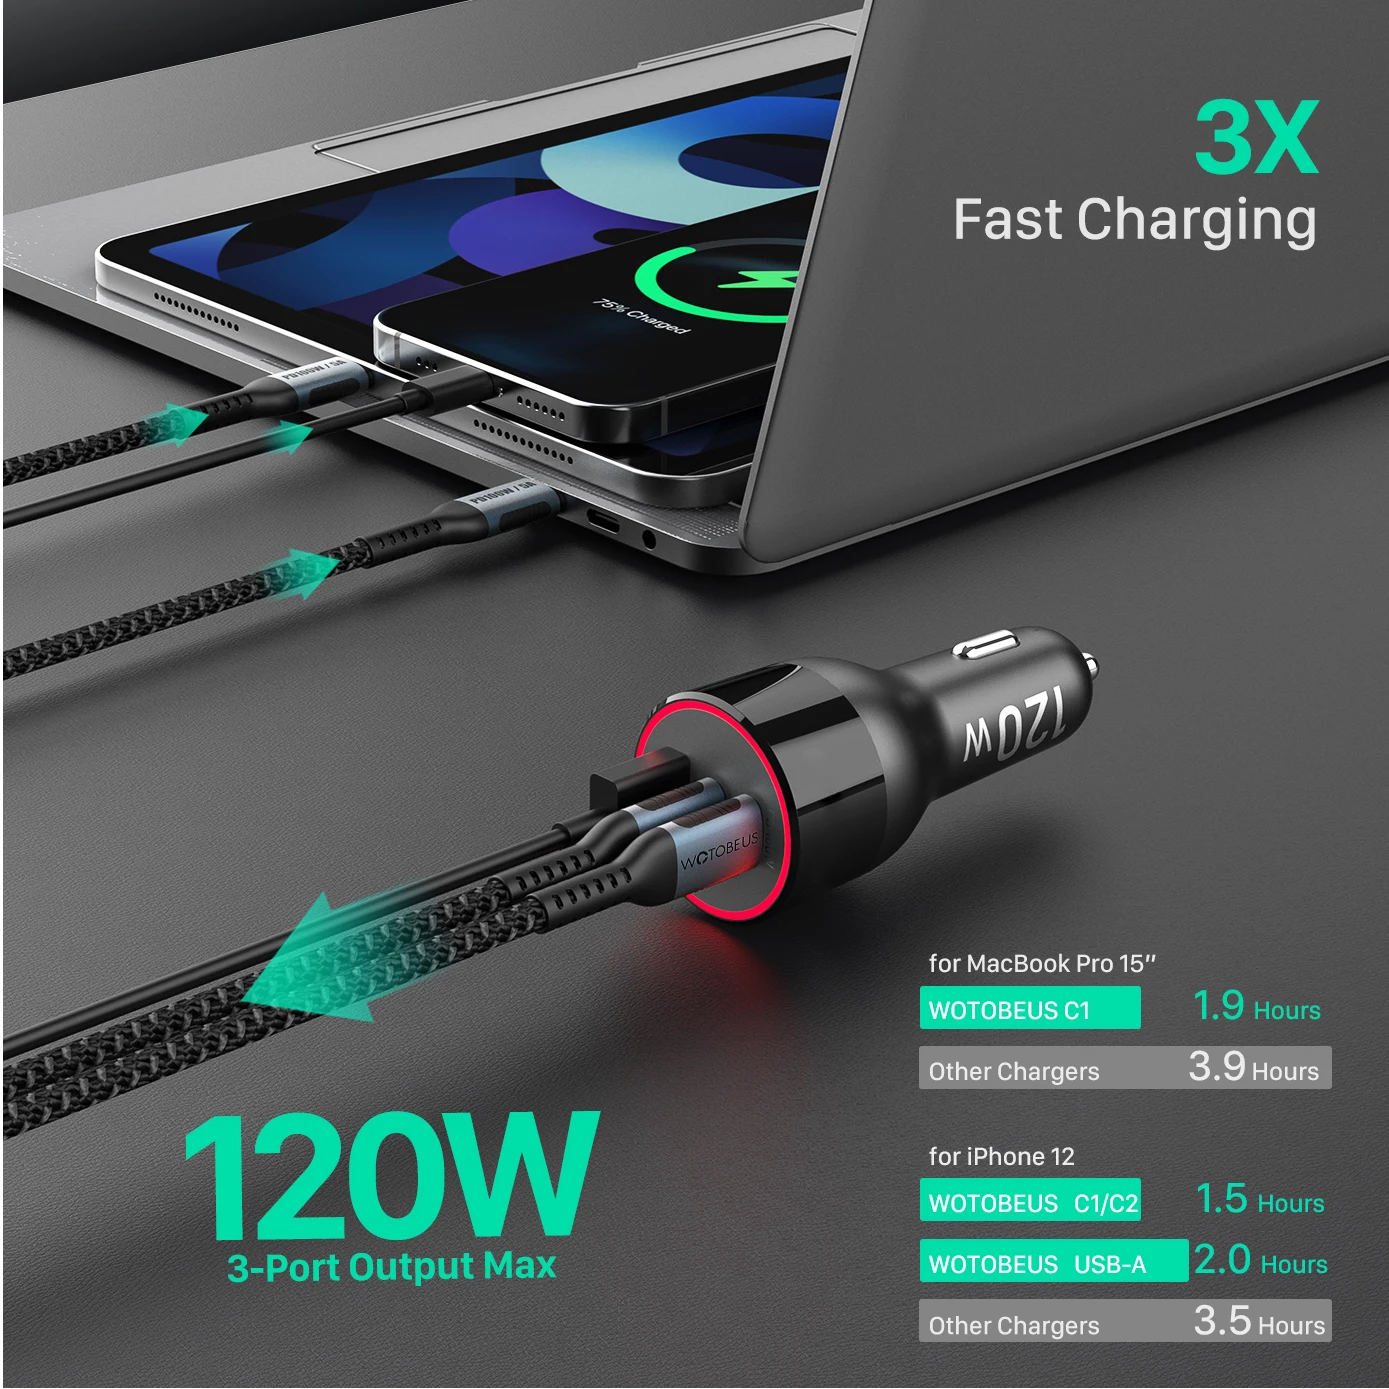 120W 3-Port USB C Car Charger QC4.0 PD 100W PPS 45W 30W QC3.0 18W for Huawei Xiaomi Type-C laptop HP Dell iPad iphone 13 S21/20 | Мобильные